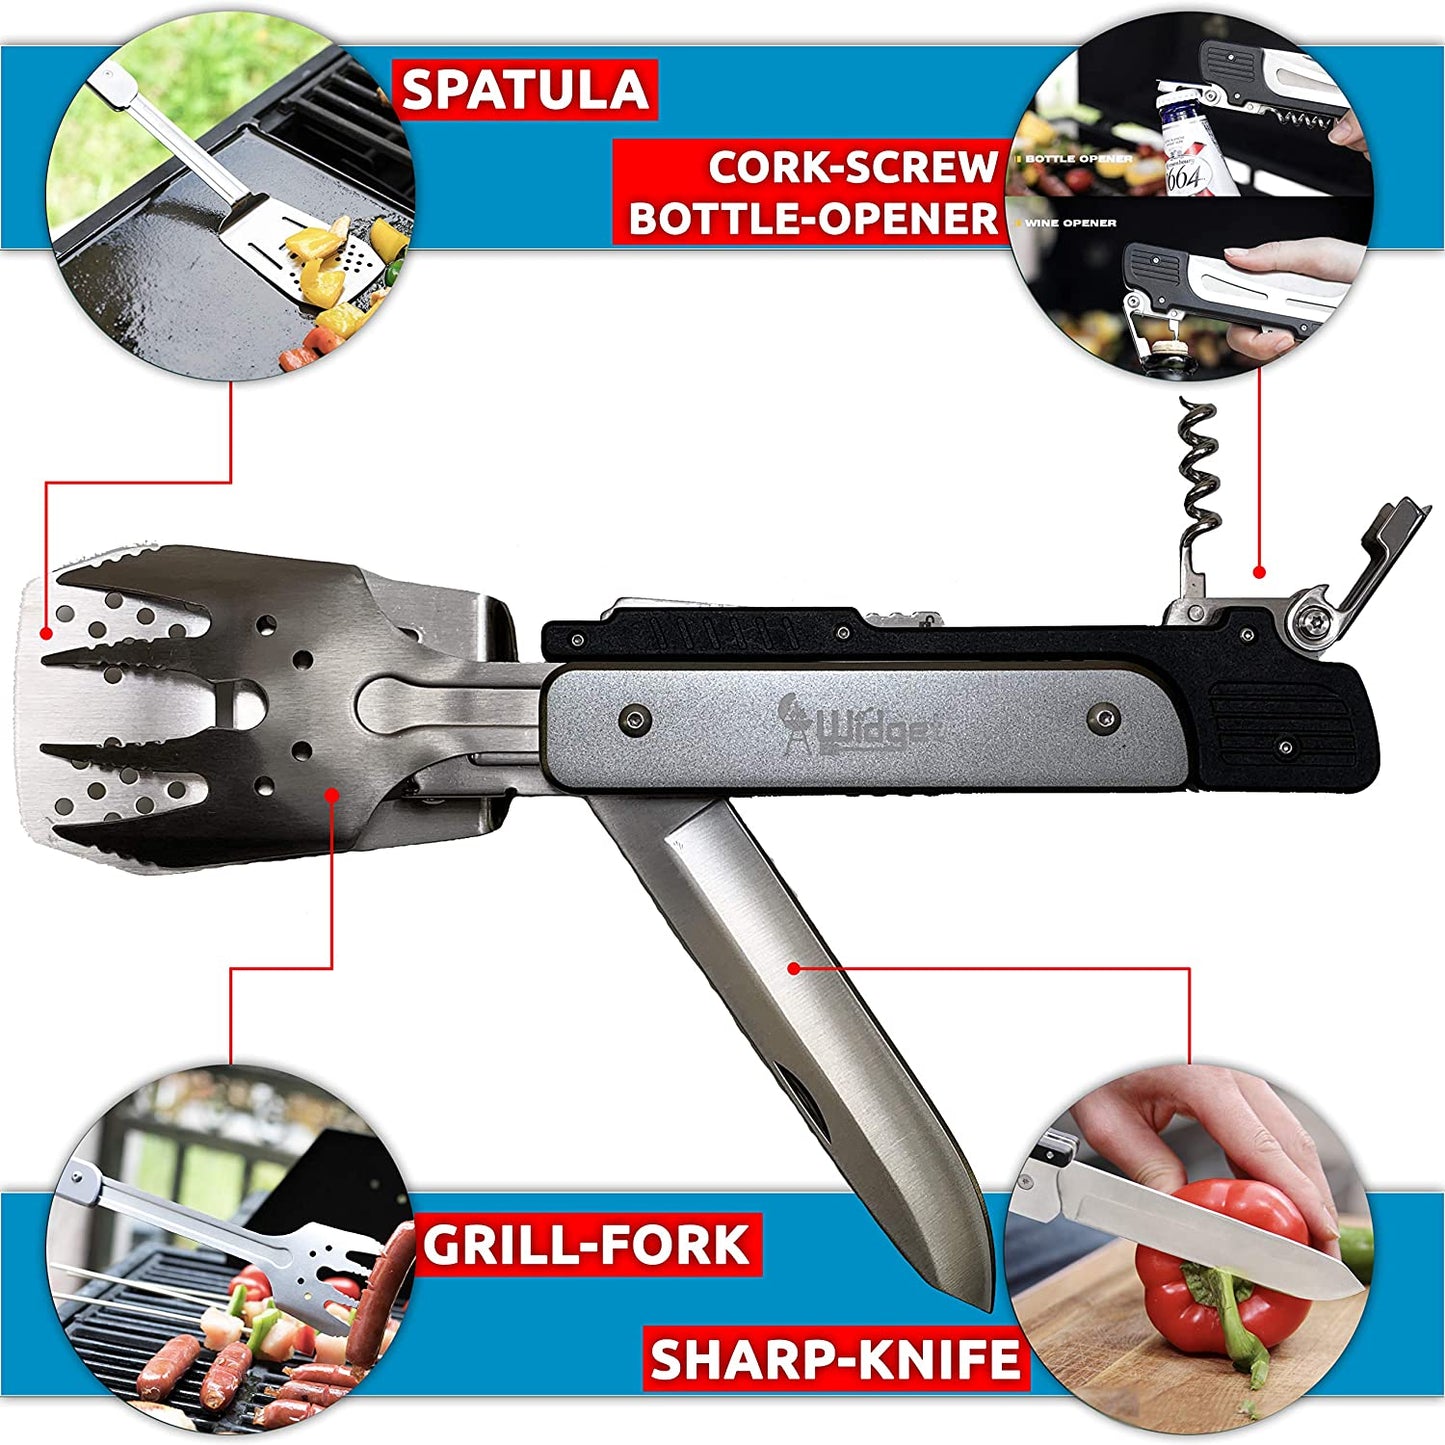 W4W BBQ Camping Utensils Travel Set - 6 in 1 Camping Cooking Gear